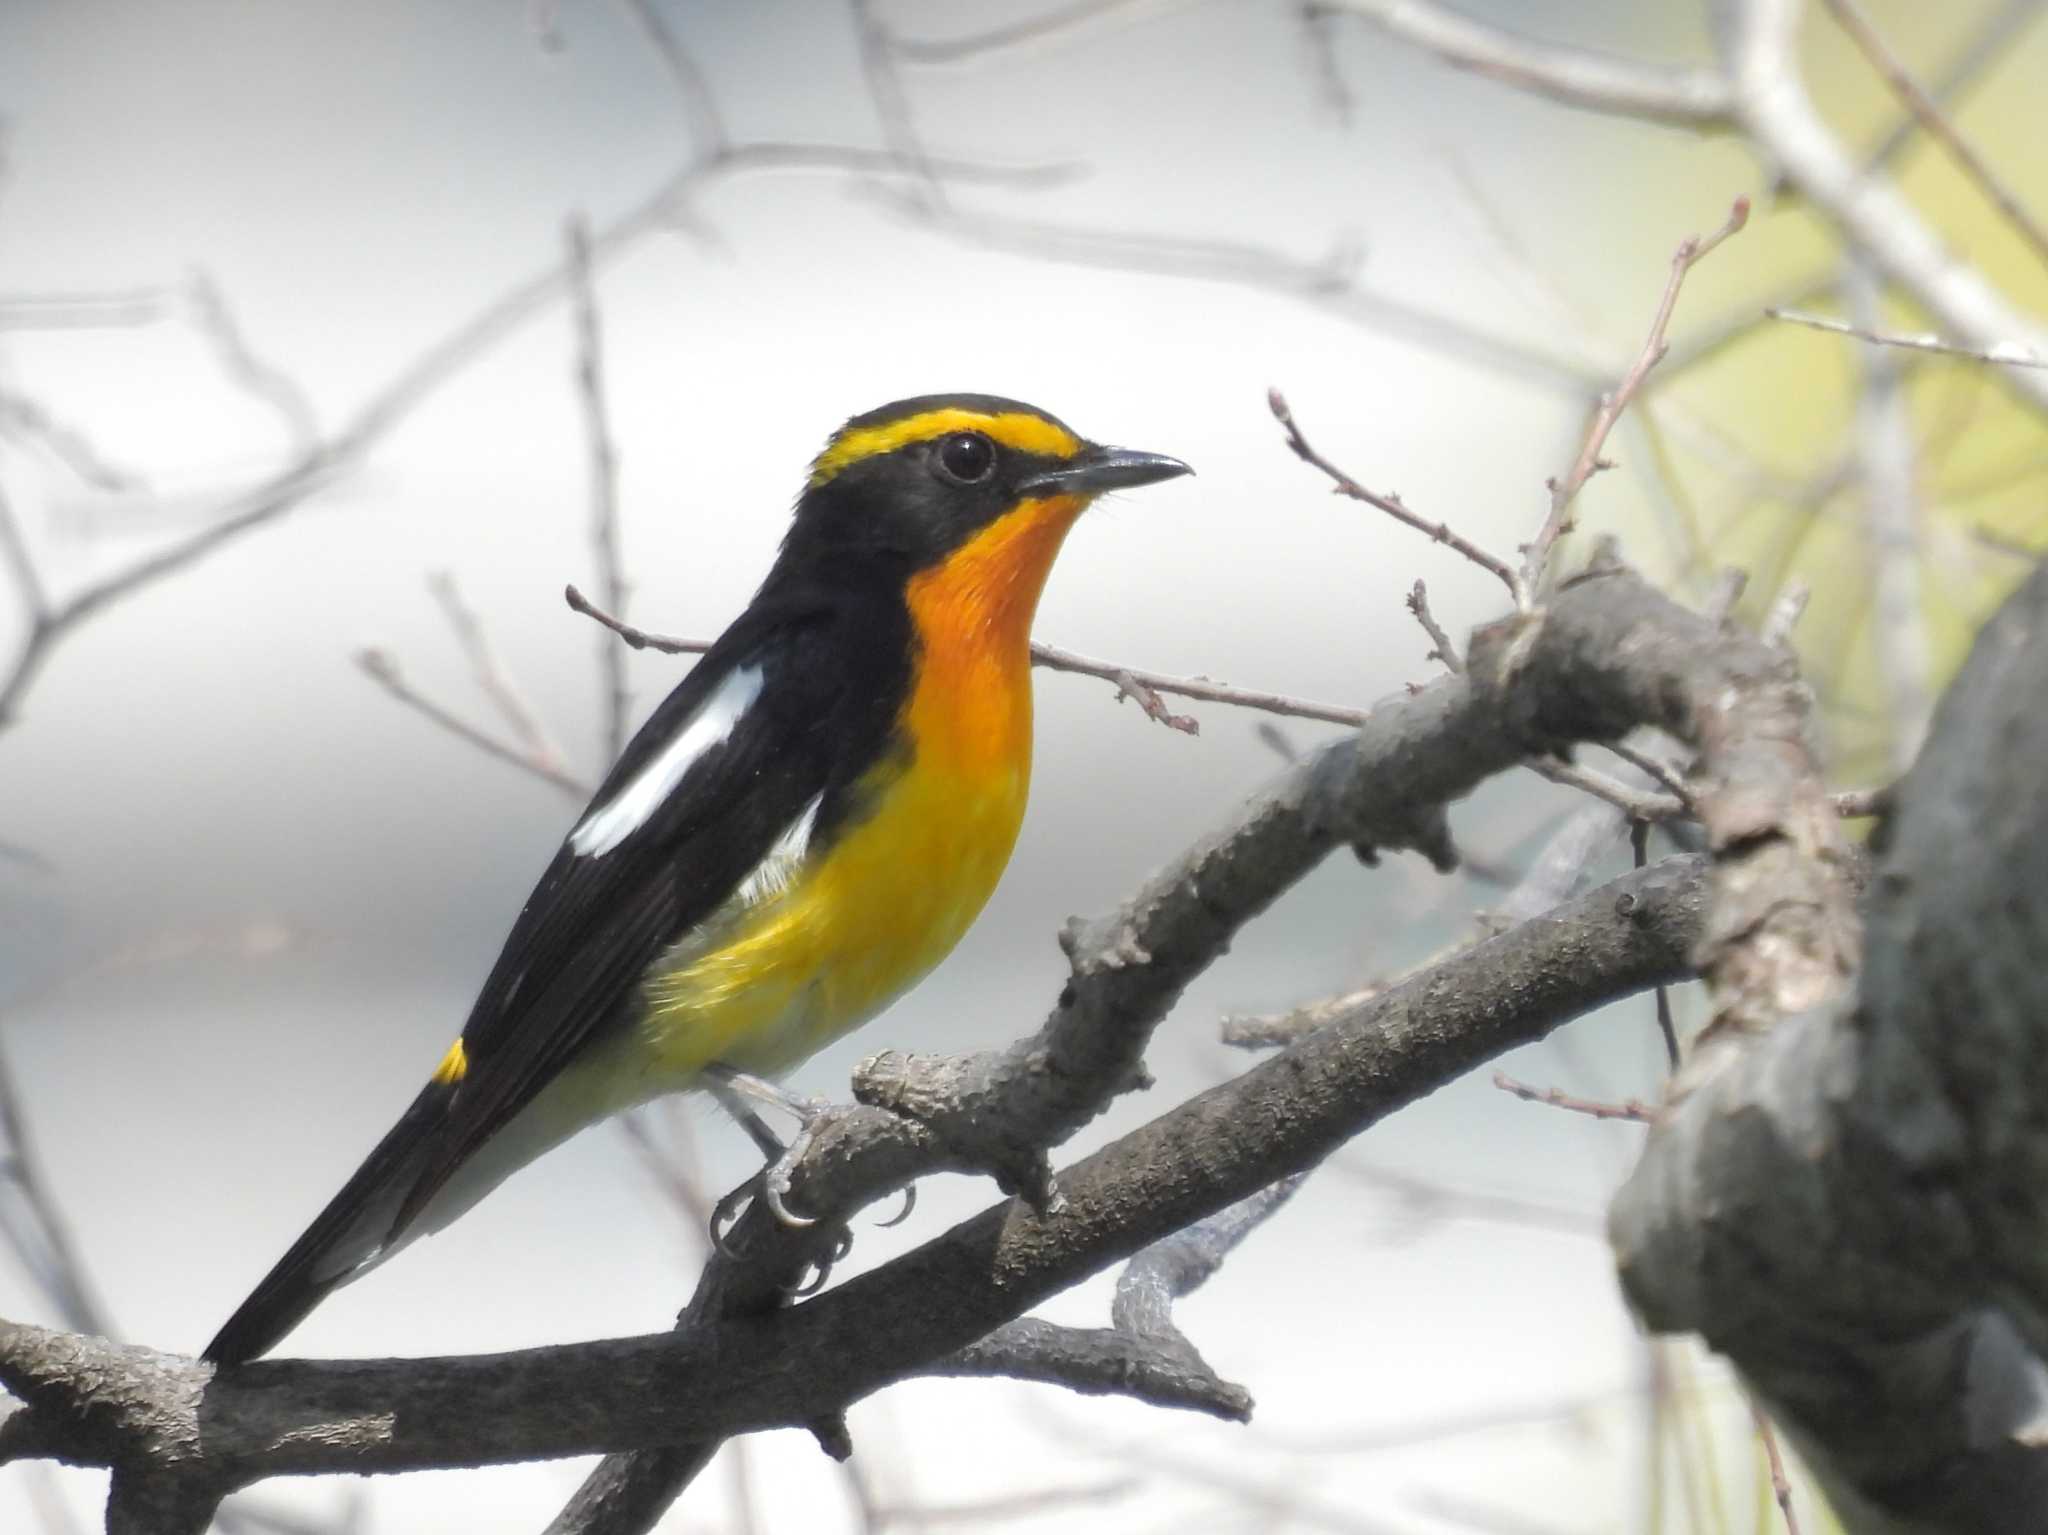 Photo of Narcissus Flycatcher at Osaka castle park by ゆりかもめ